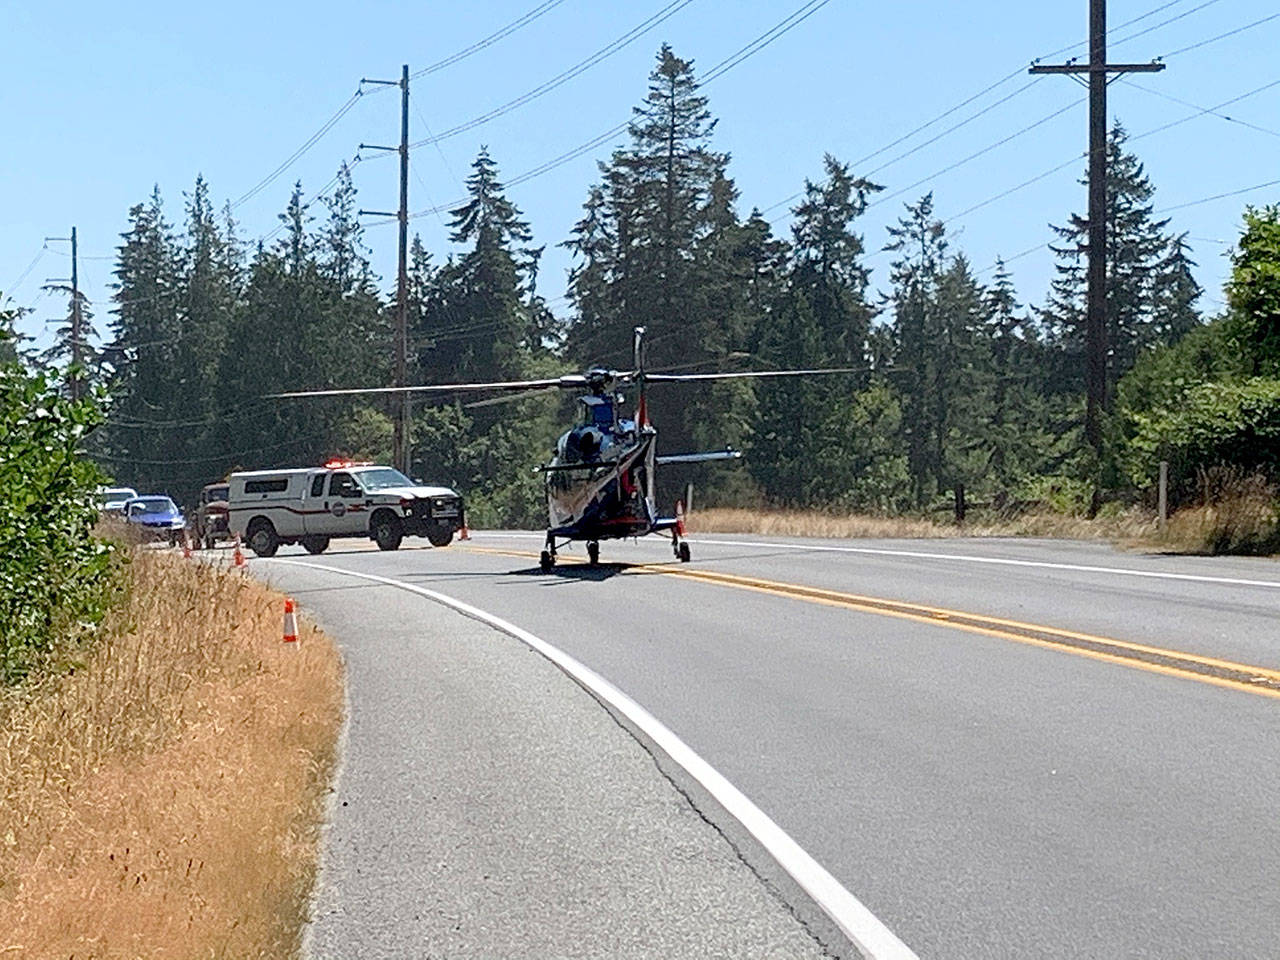 Photo provided                                Bicyclist Stephen Cairns, 24, of Seattle, was airlifted to Providence Hospital in Everett after being struck by a car along State Highway 525 on Tuesday.